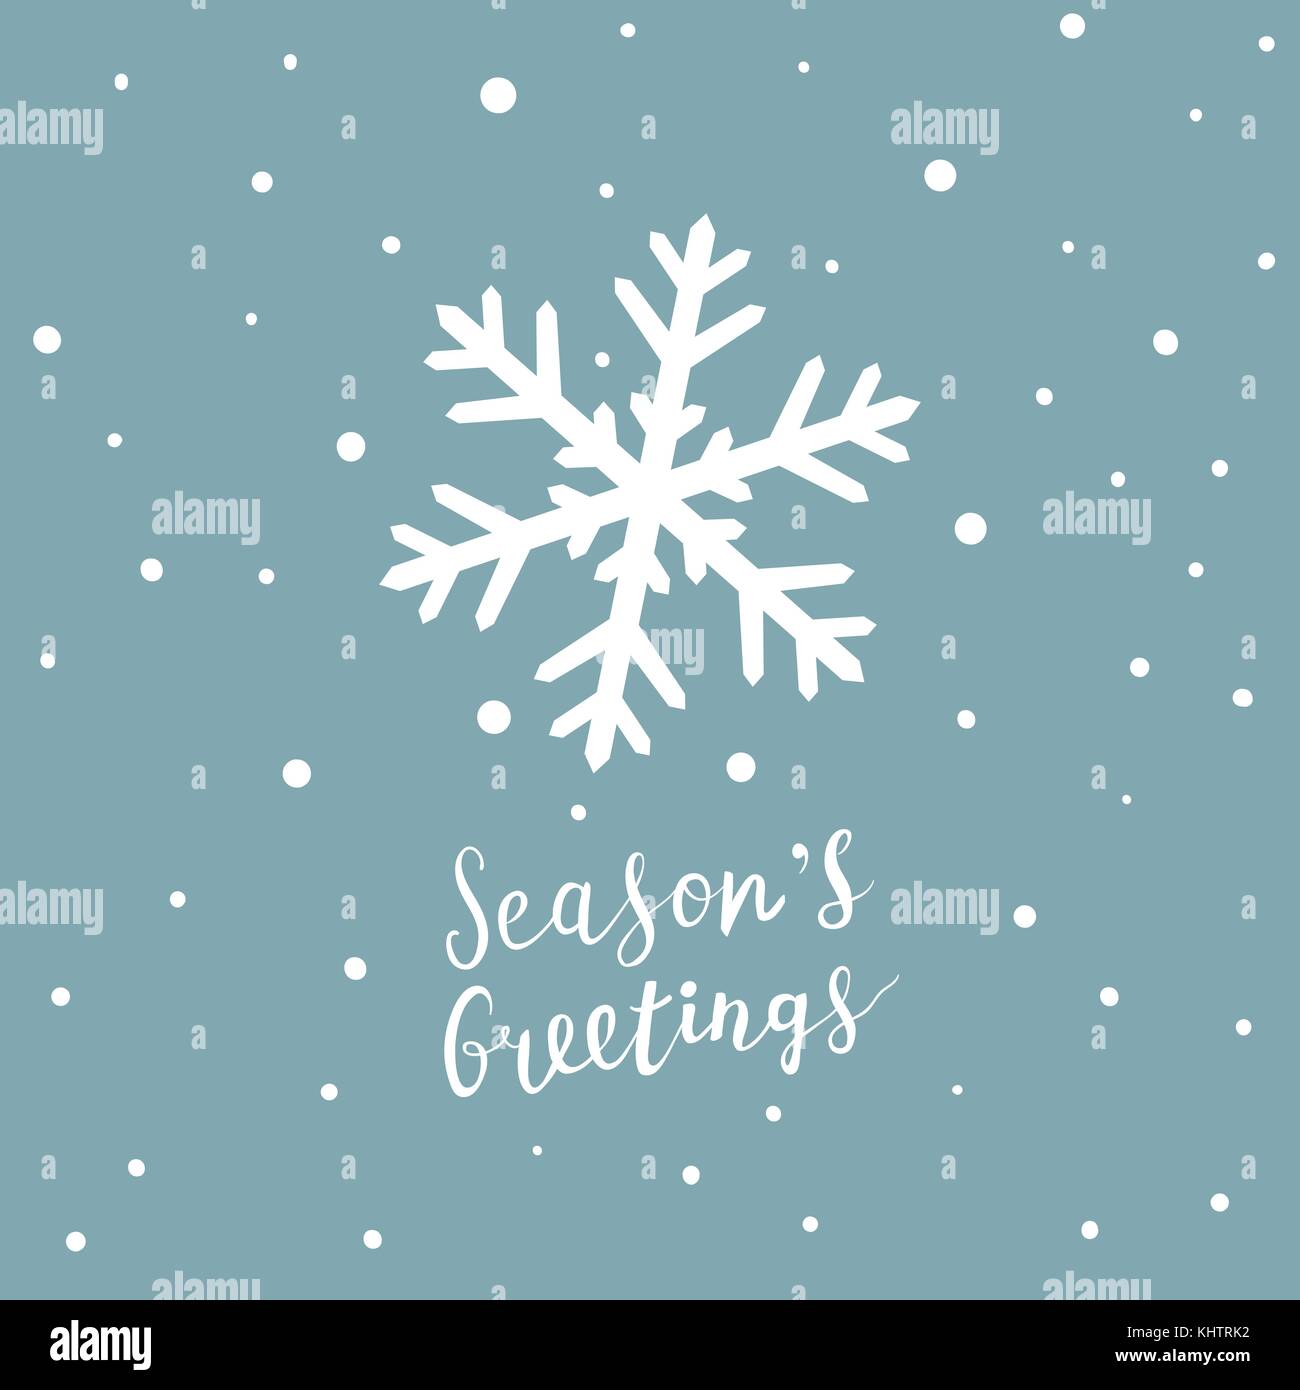 Christmas card with snowflake and hand written lettering, Christmas design elements Stock Vector